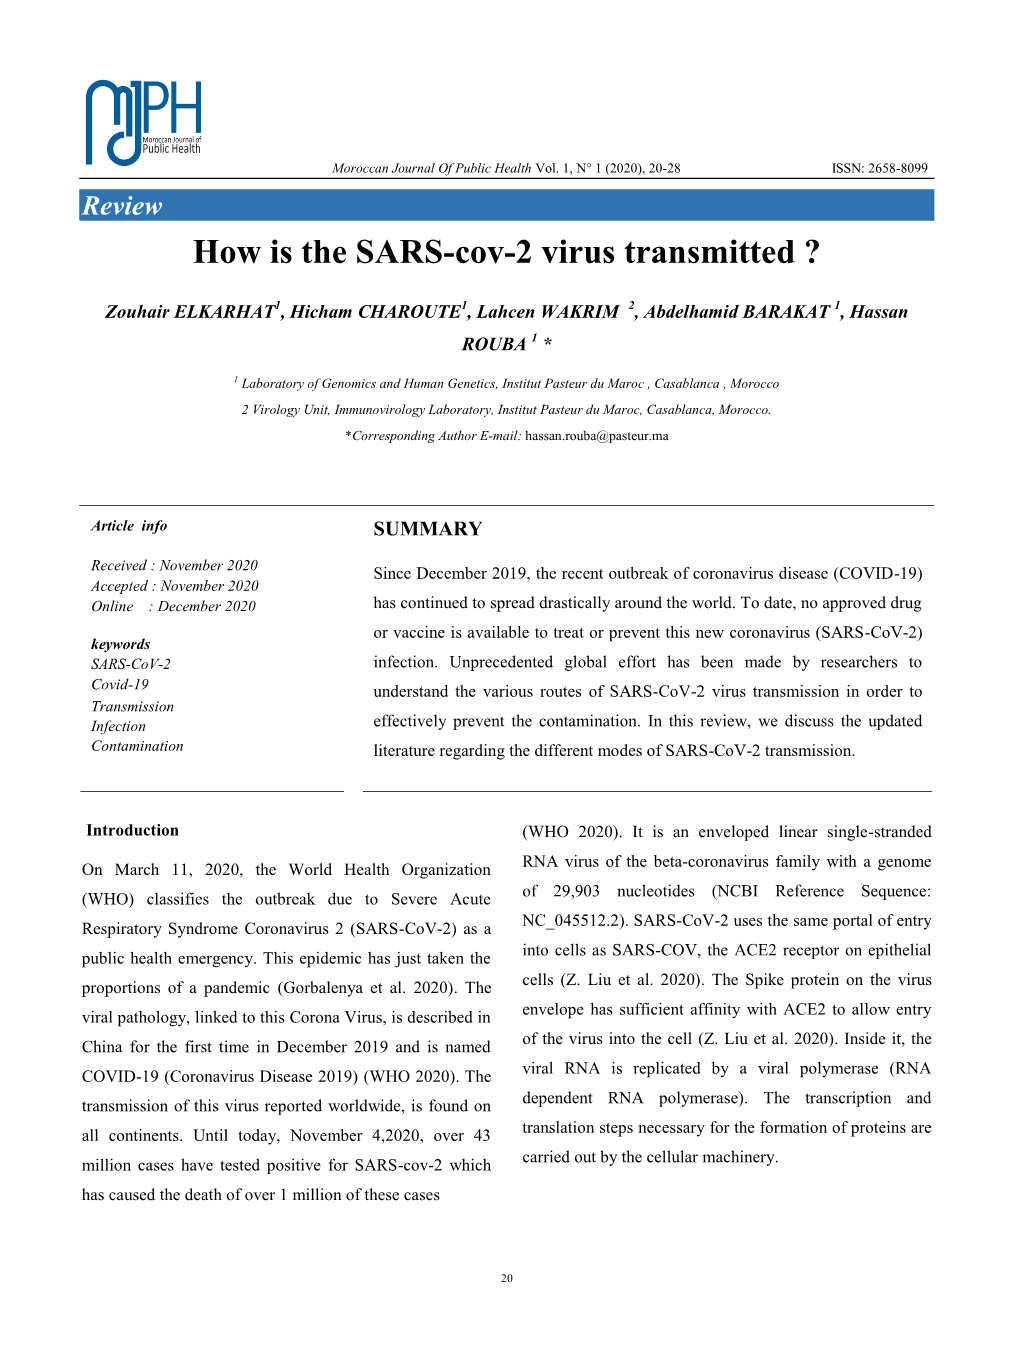 How Is the SARS-Cov-2 Virus Transmitted ?